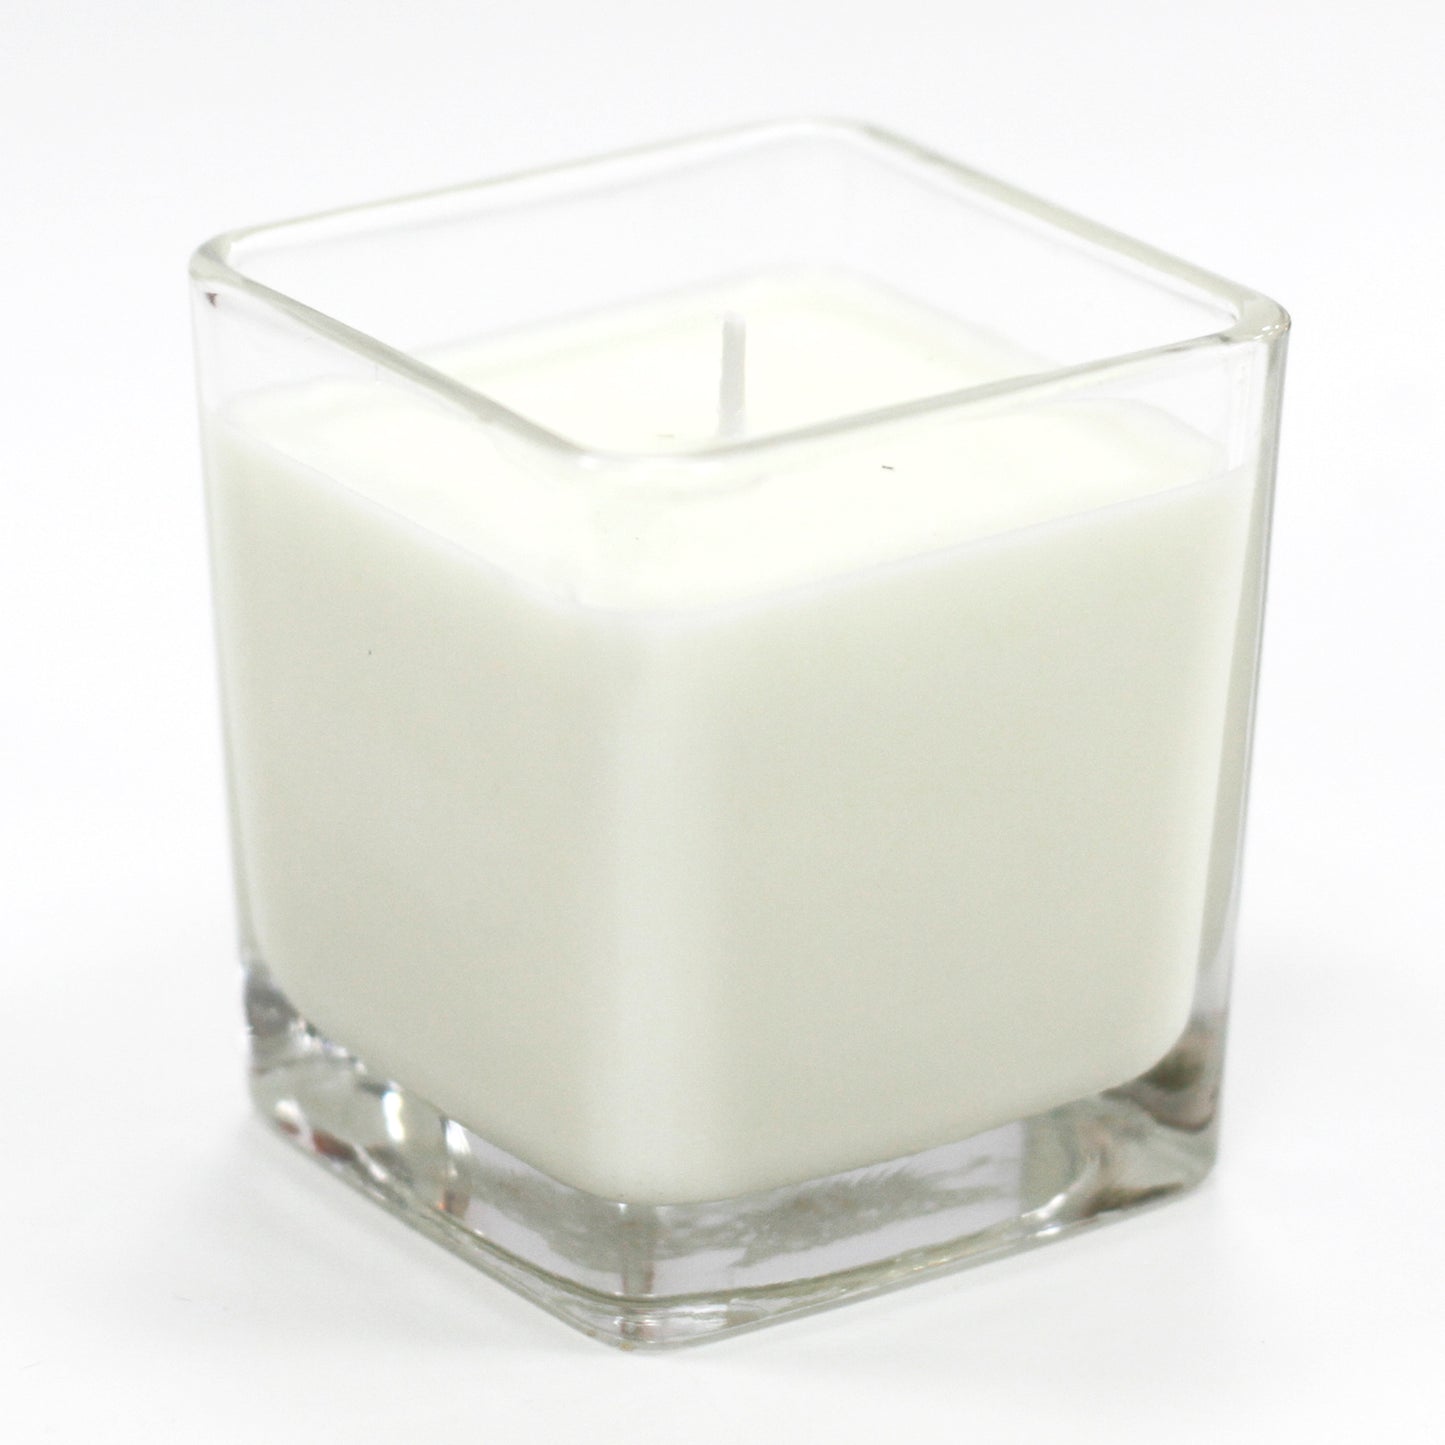 White Label Soy Wax Jar Candle - Cucumber & Mint